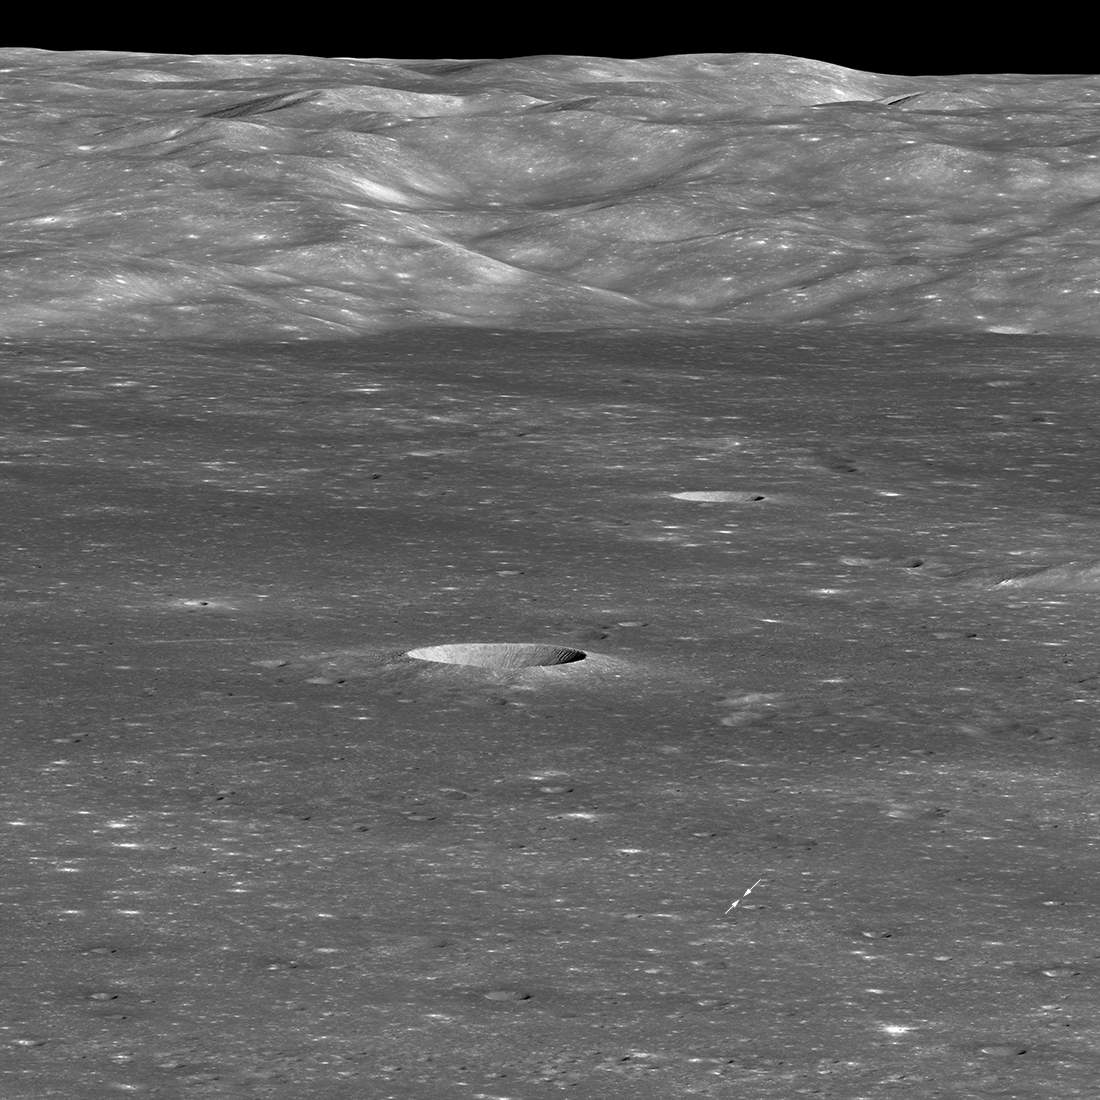 Chang'e-4 from LRO (January 30, 2019)